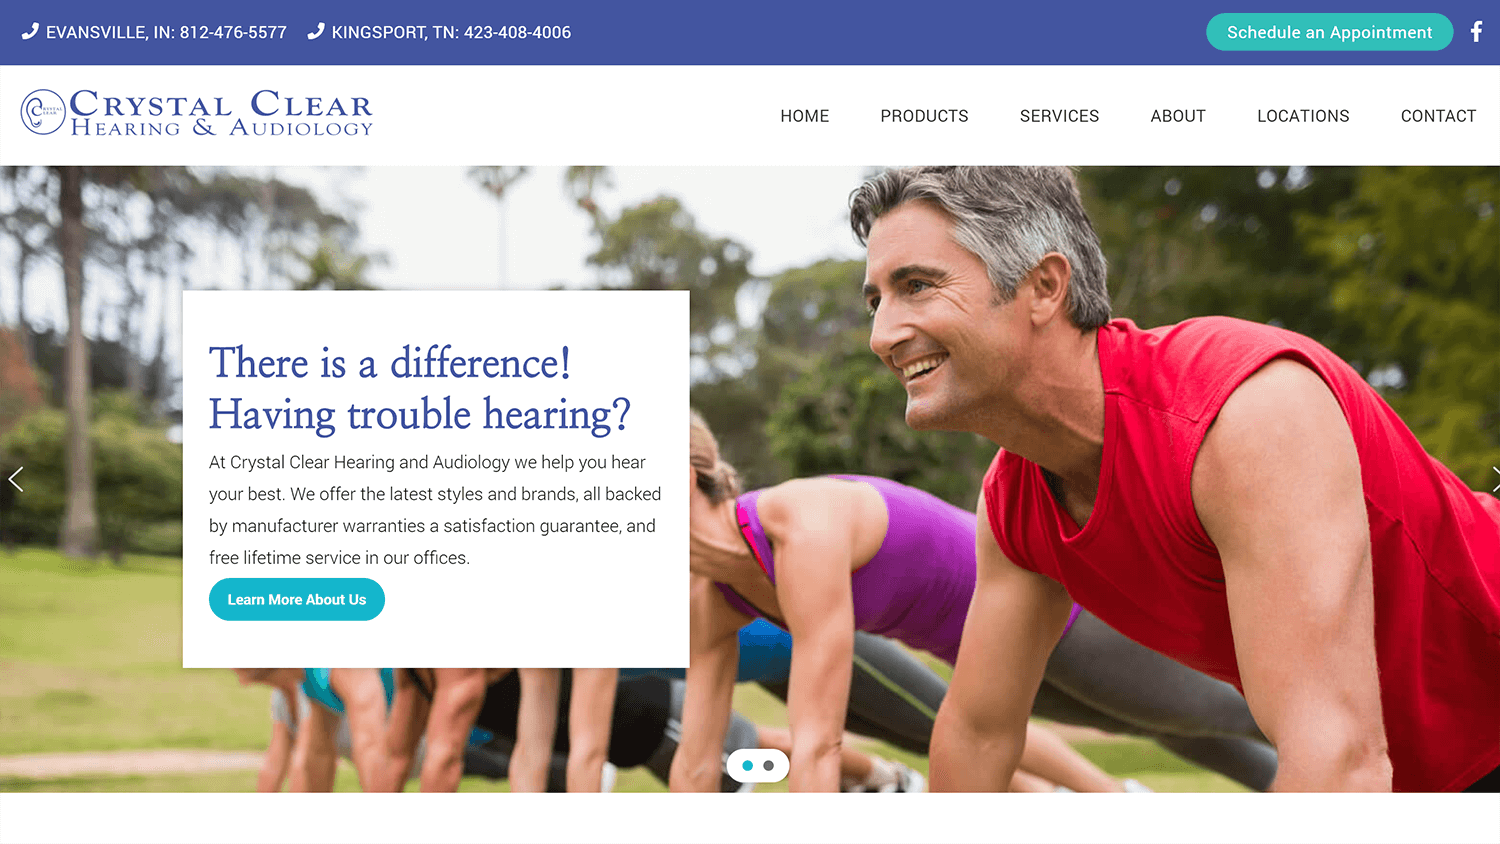 Crystal Clear Hearing & Audiology